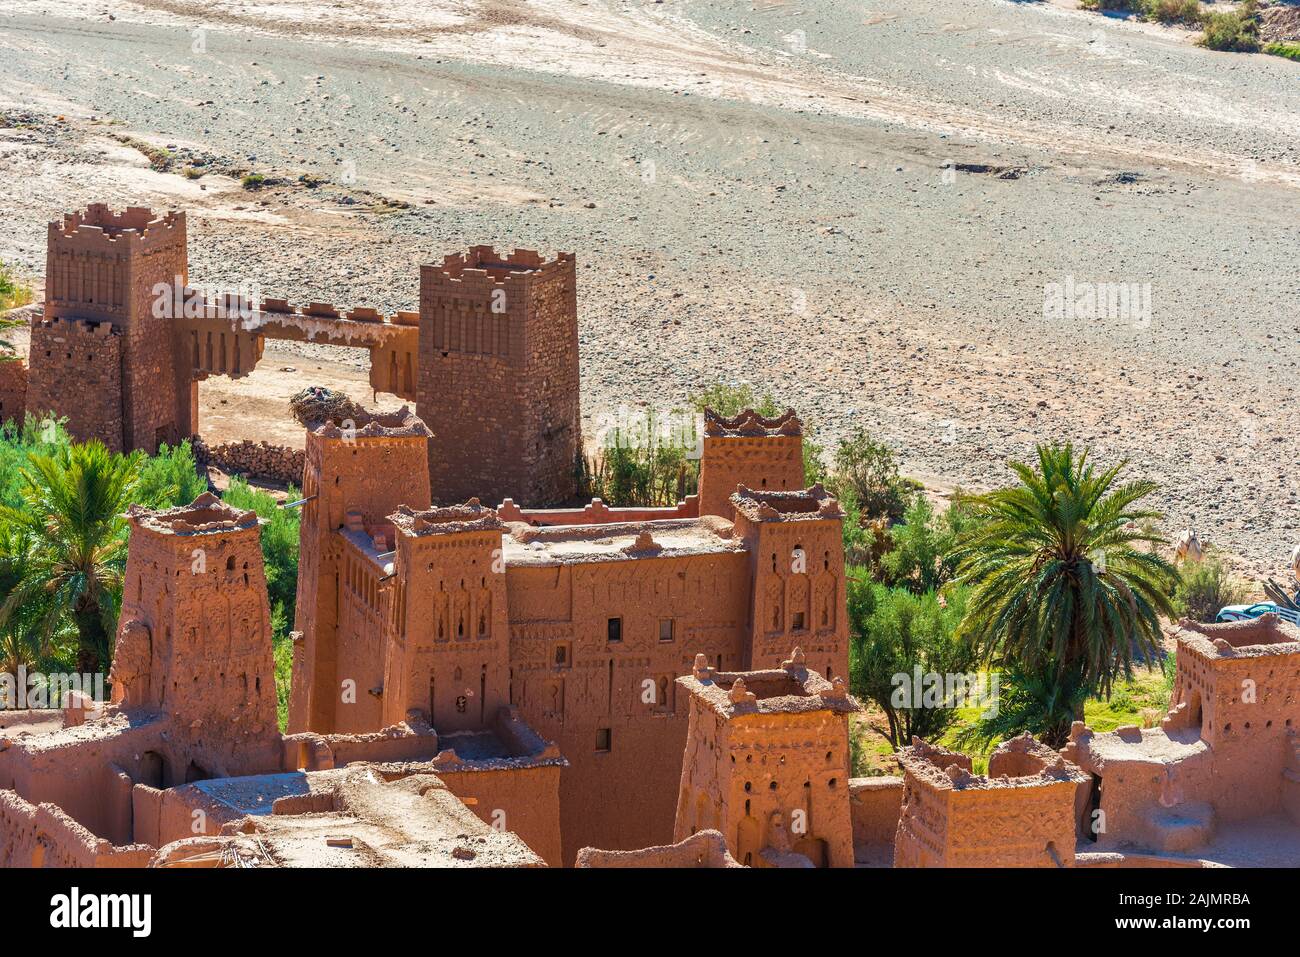 View of the fortified city of Ait-Ben-Haddou, Morocco Stock Photo